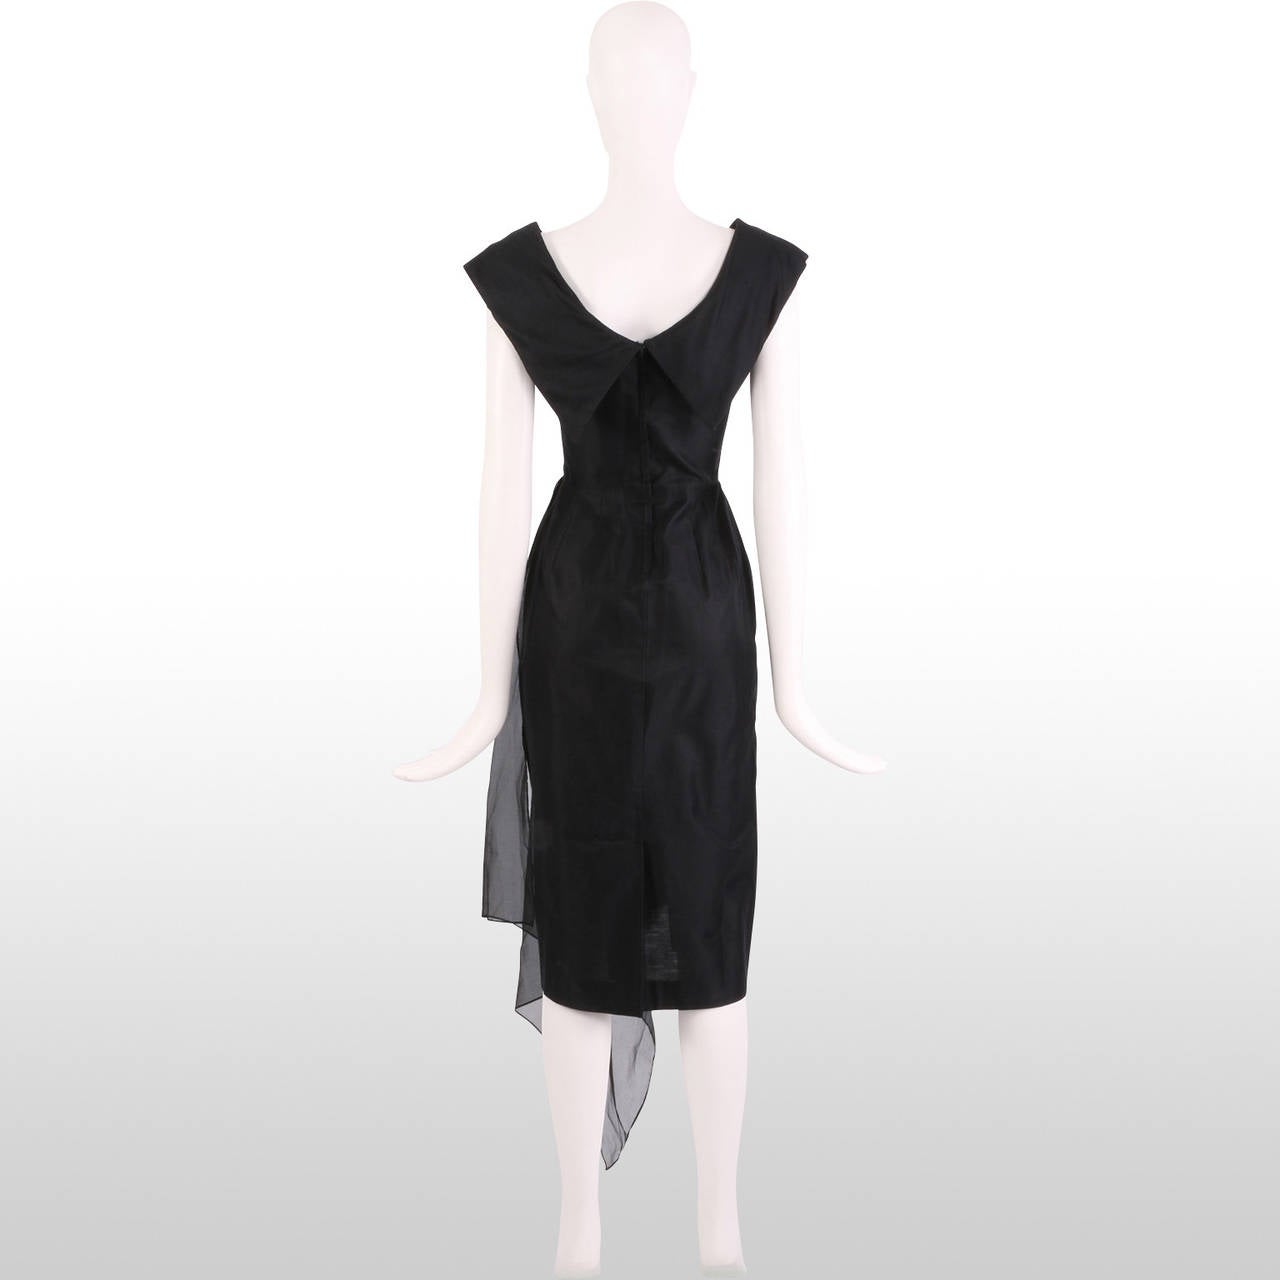 Women's 1950's Black Sweetheart Neck With Chiffon Detail Cocktail Dress